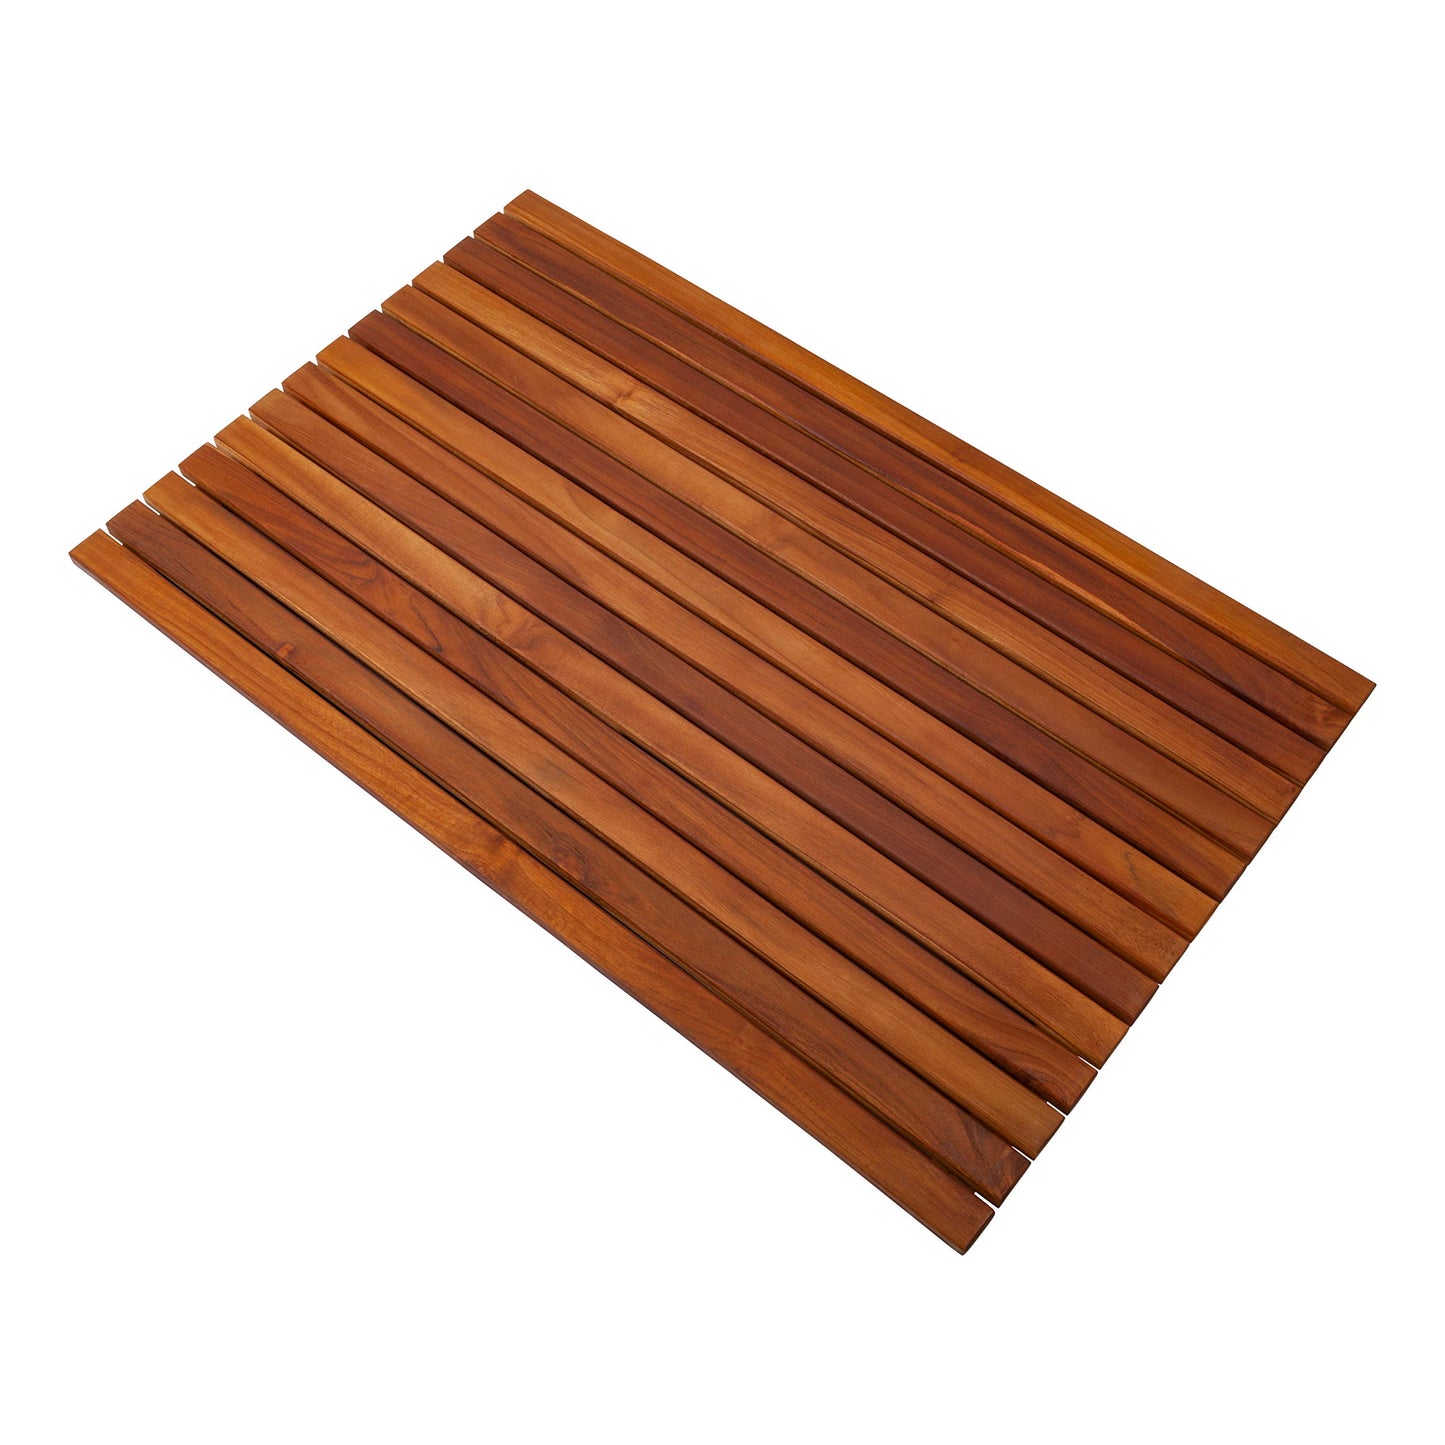 Nordic Style Premium Teak Shower and Bath Mat for Indoor and Outdoor Use - Non-Slip Wooden Platform for Spa, Sauna, Pool, Hot Tub - Flooring Decor